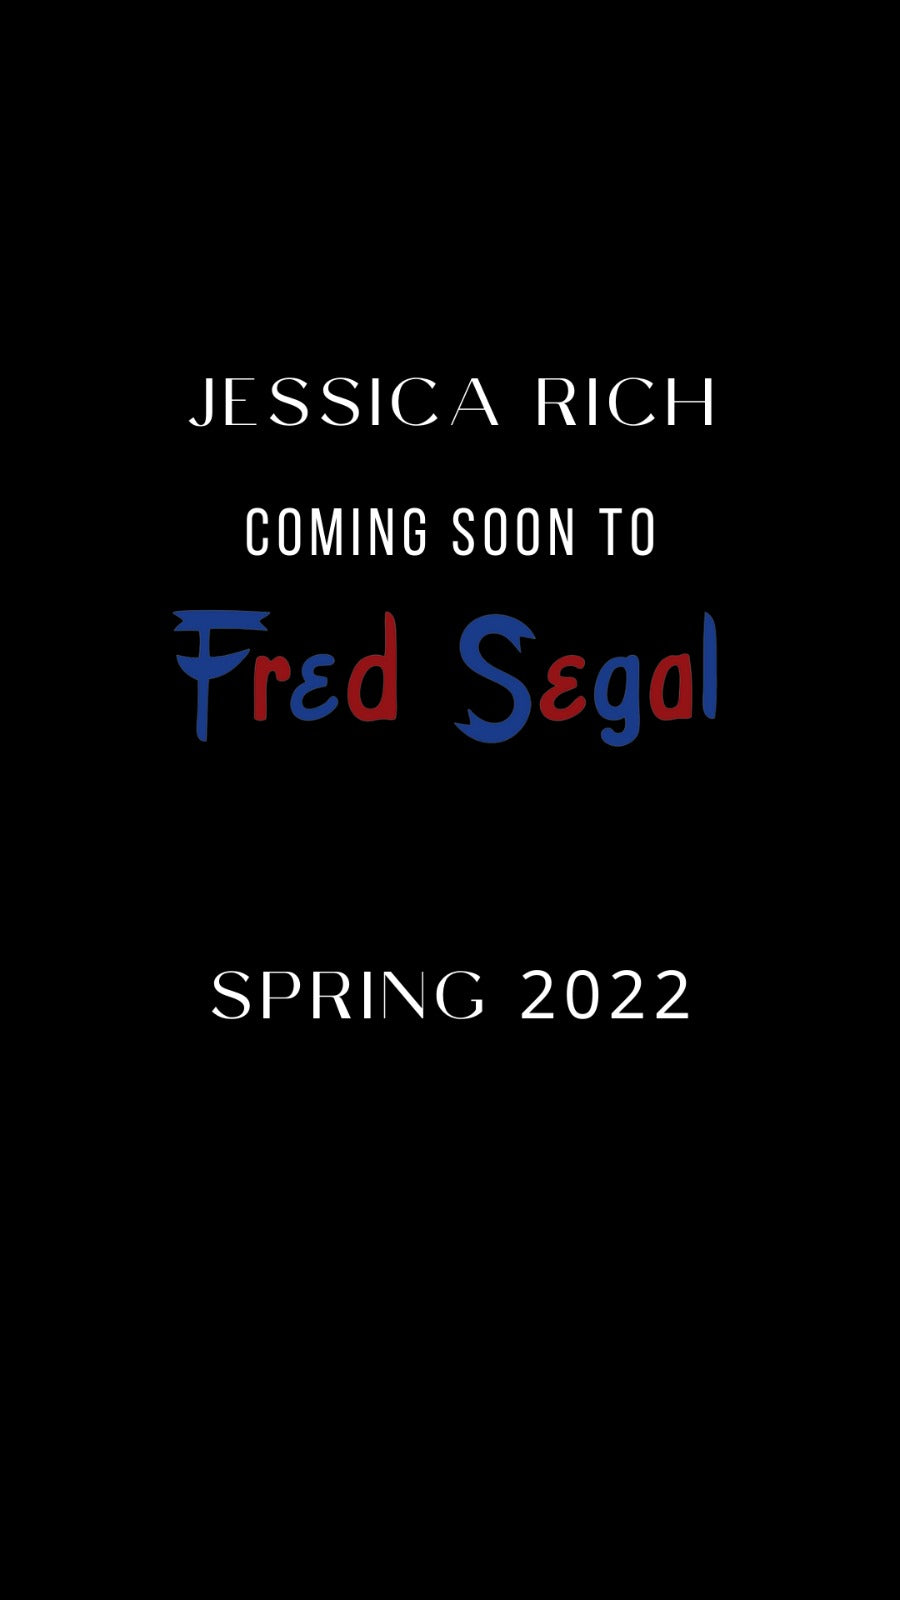 JESSICA RICH AVAILABLE AT FRED SEGAL VEGAS SPRING 2022